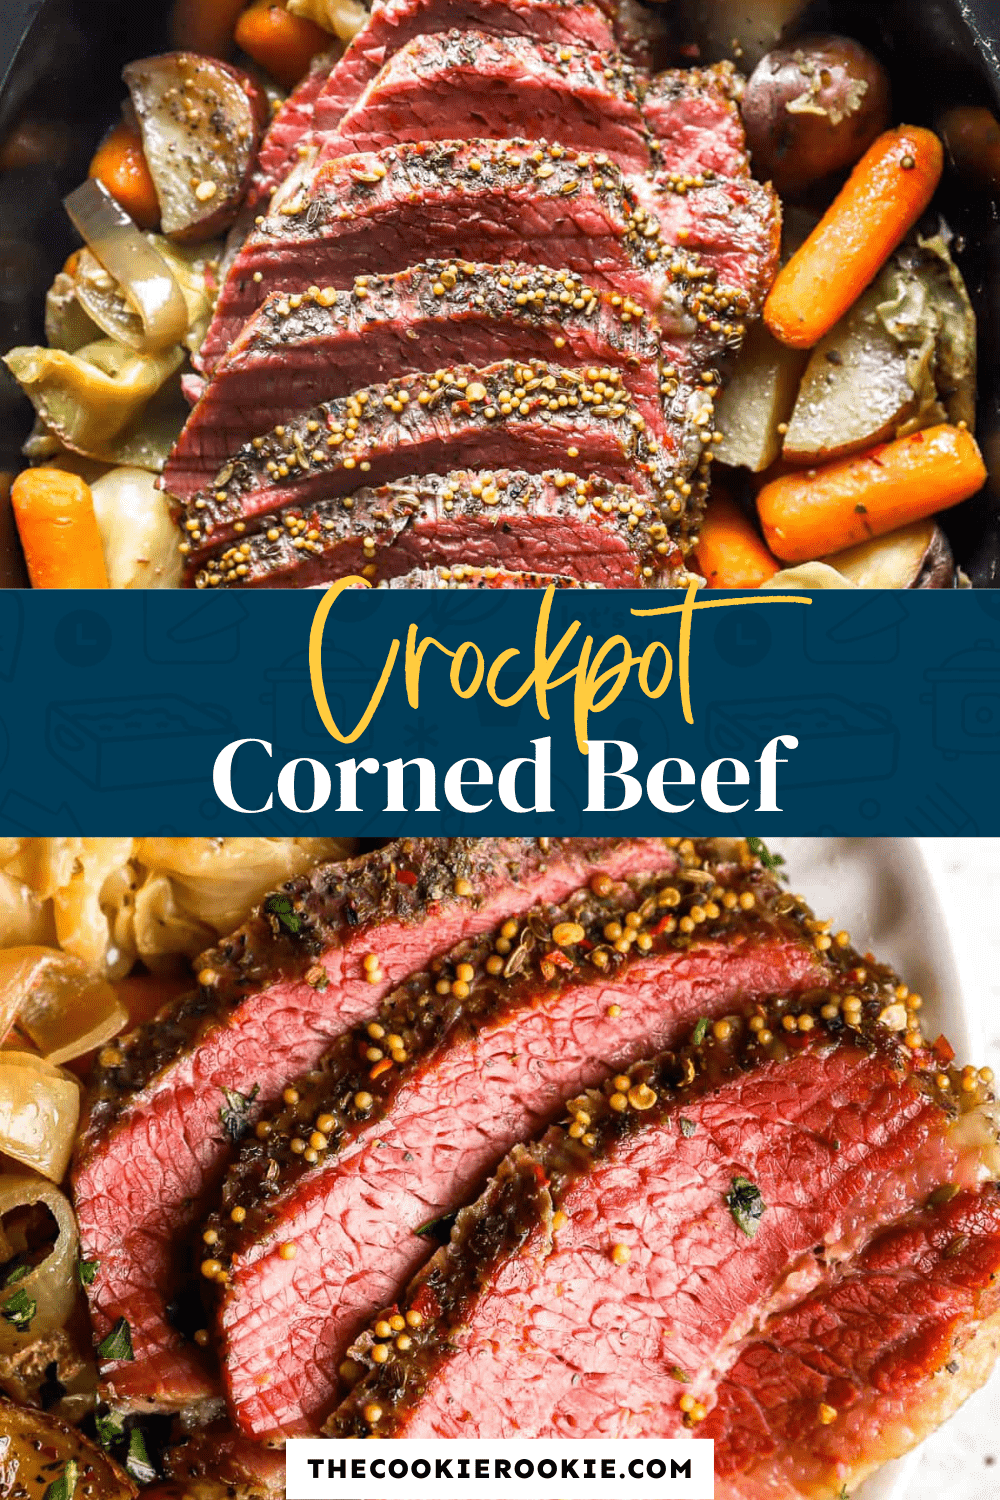 Crockpot Corned Beef and Cabbage Recipe - The Cookie Rookie®